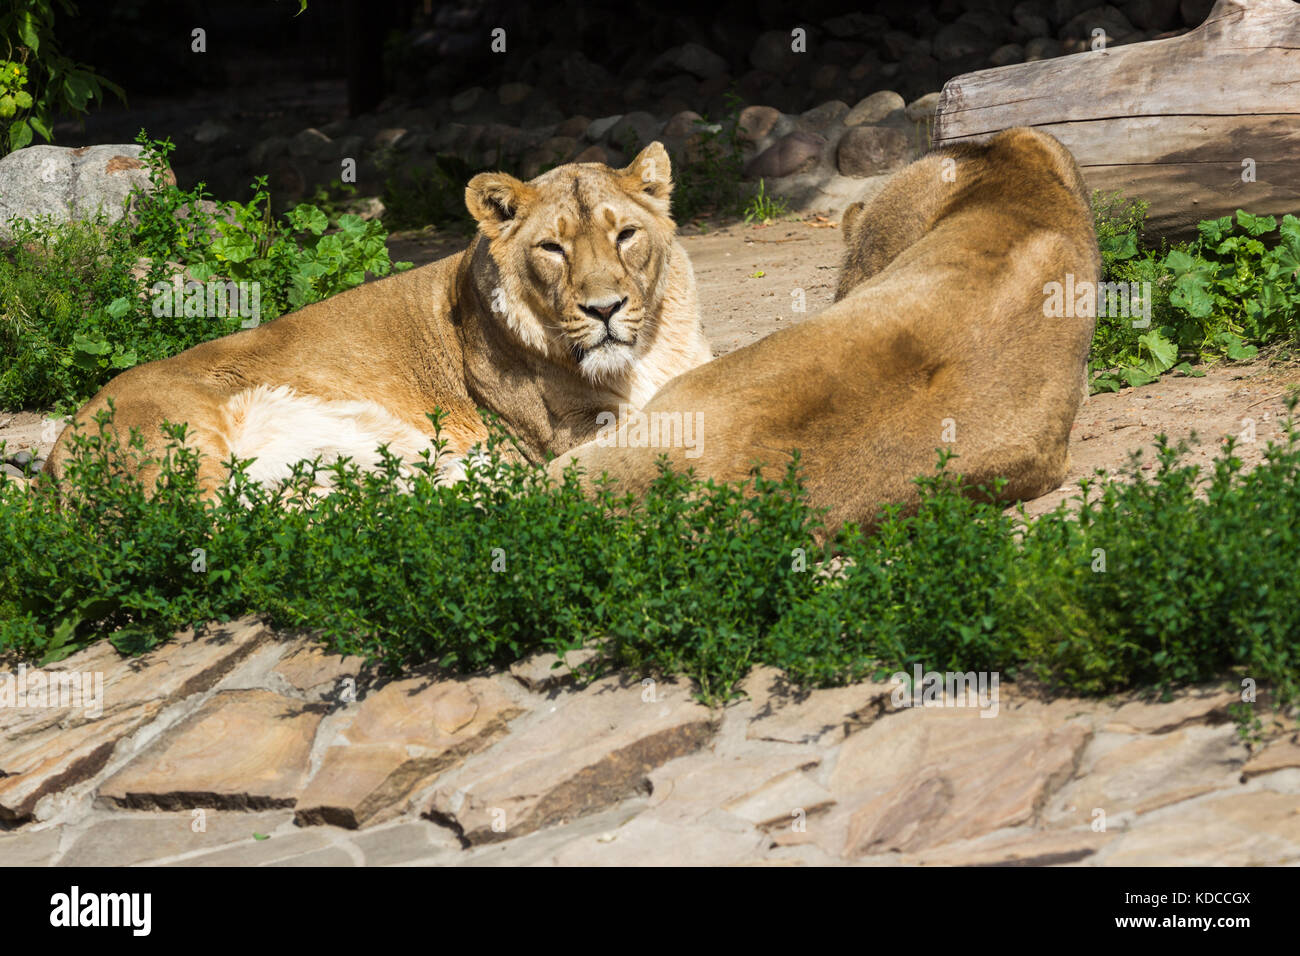 young male Asian lion lazily watching the photographer Stock Photo